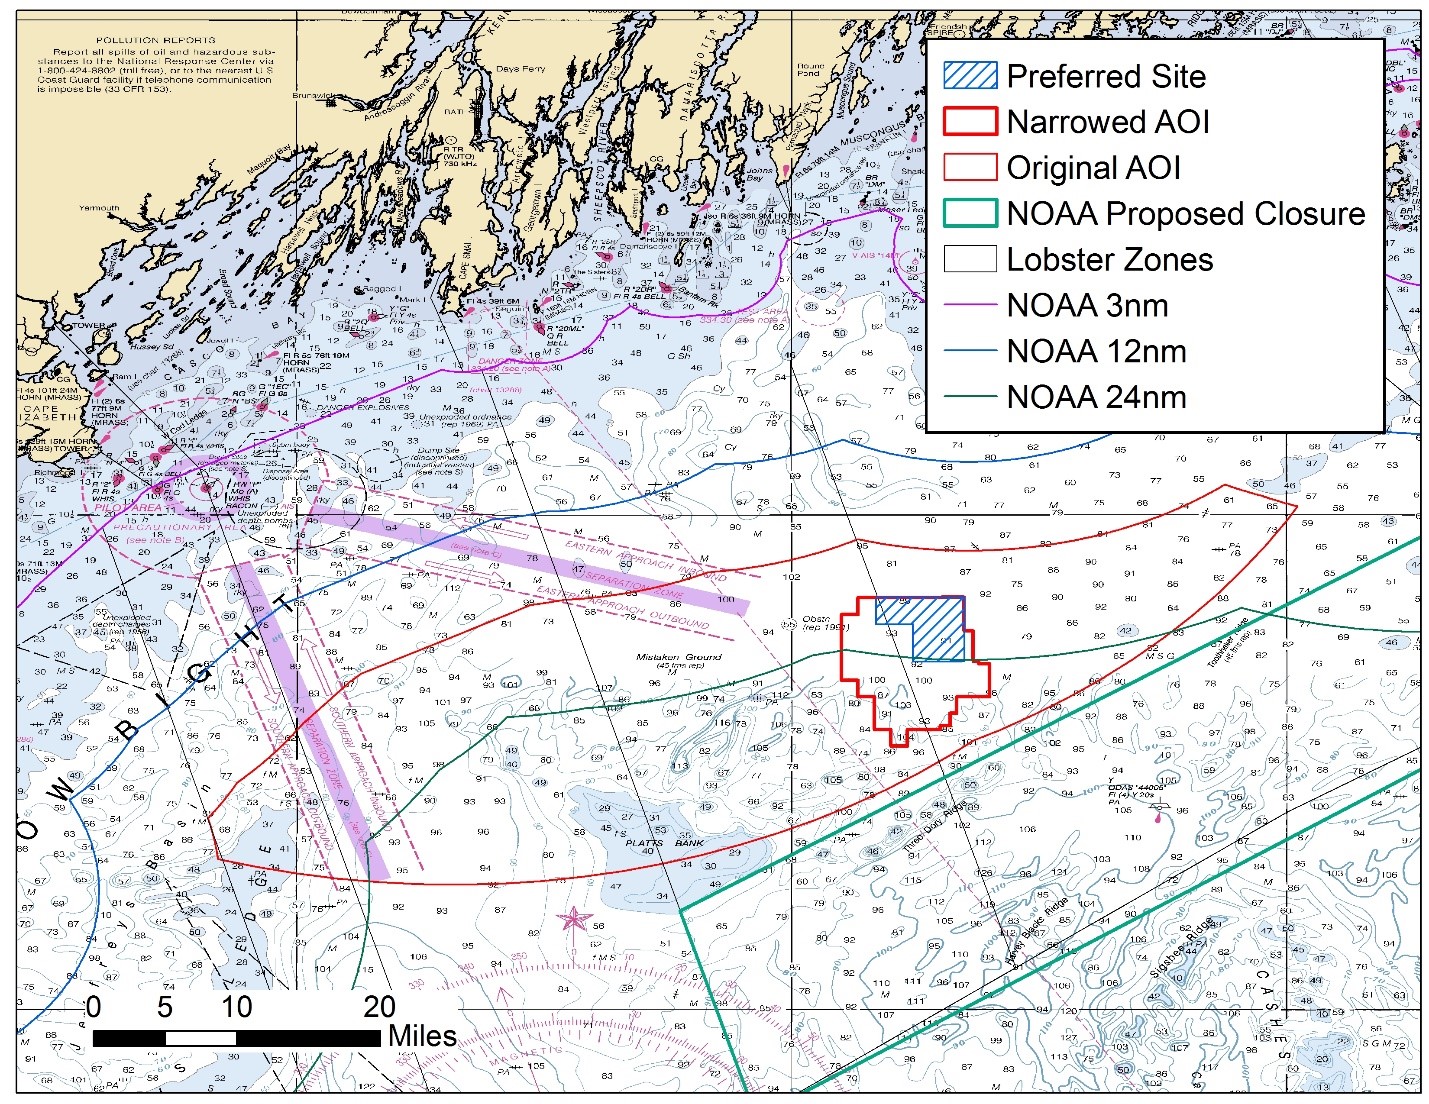 An image showing a map with the location of the preferred site for Maine's floating wind research array